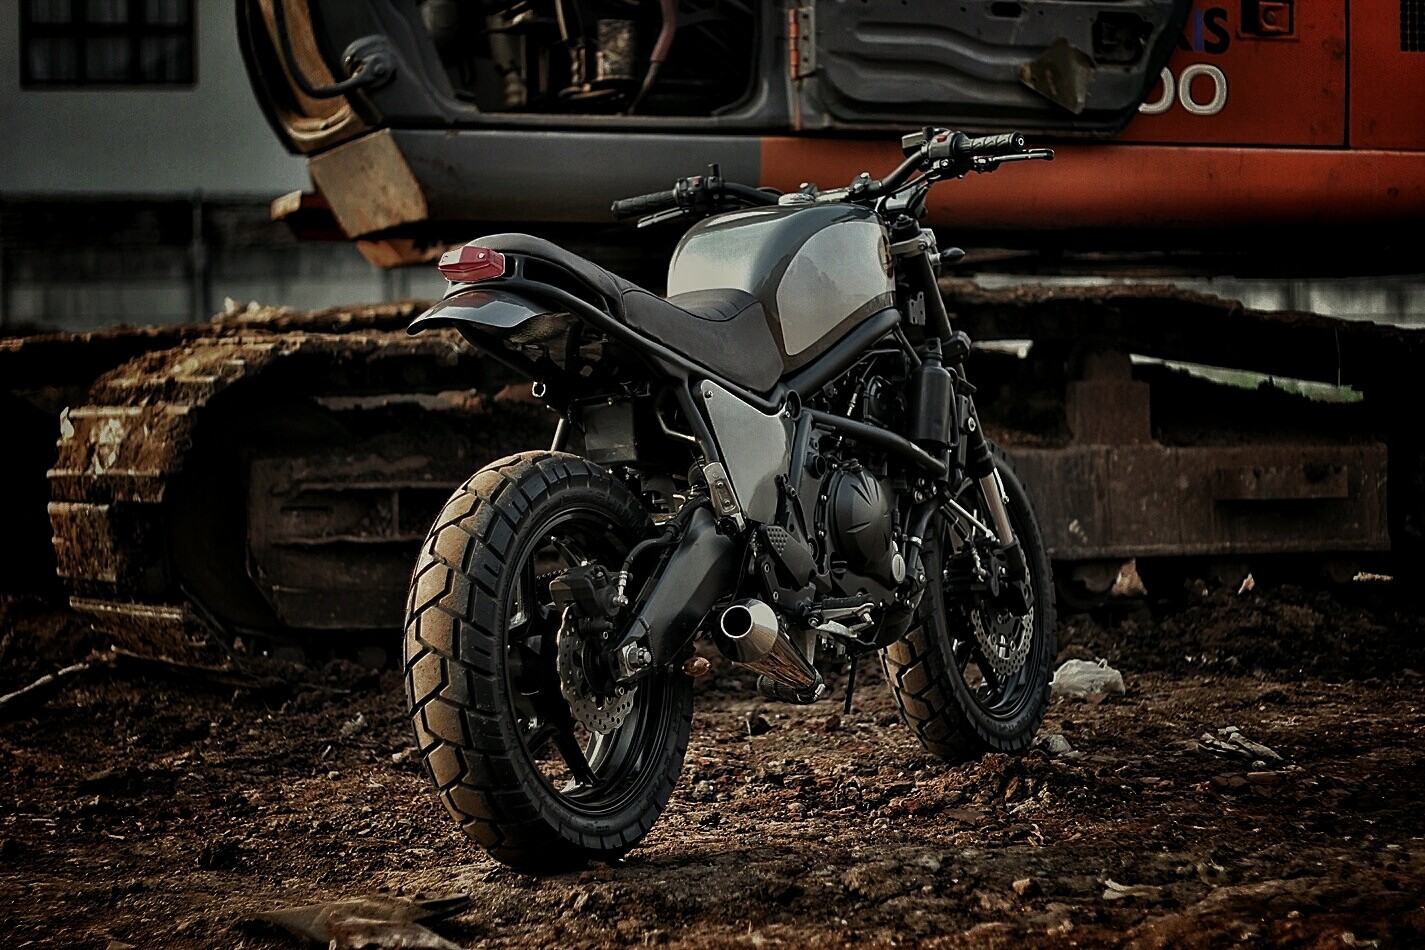 A Kawasaki Versys 650 Scrambler Is a Thing We See Every Day - autoevolution